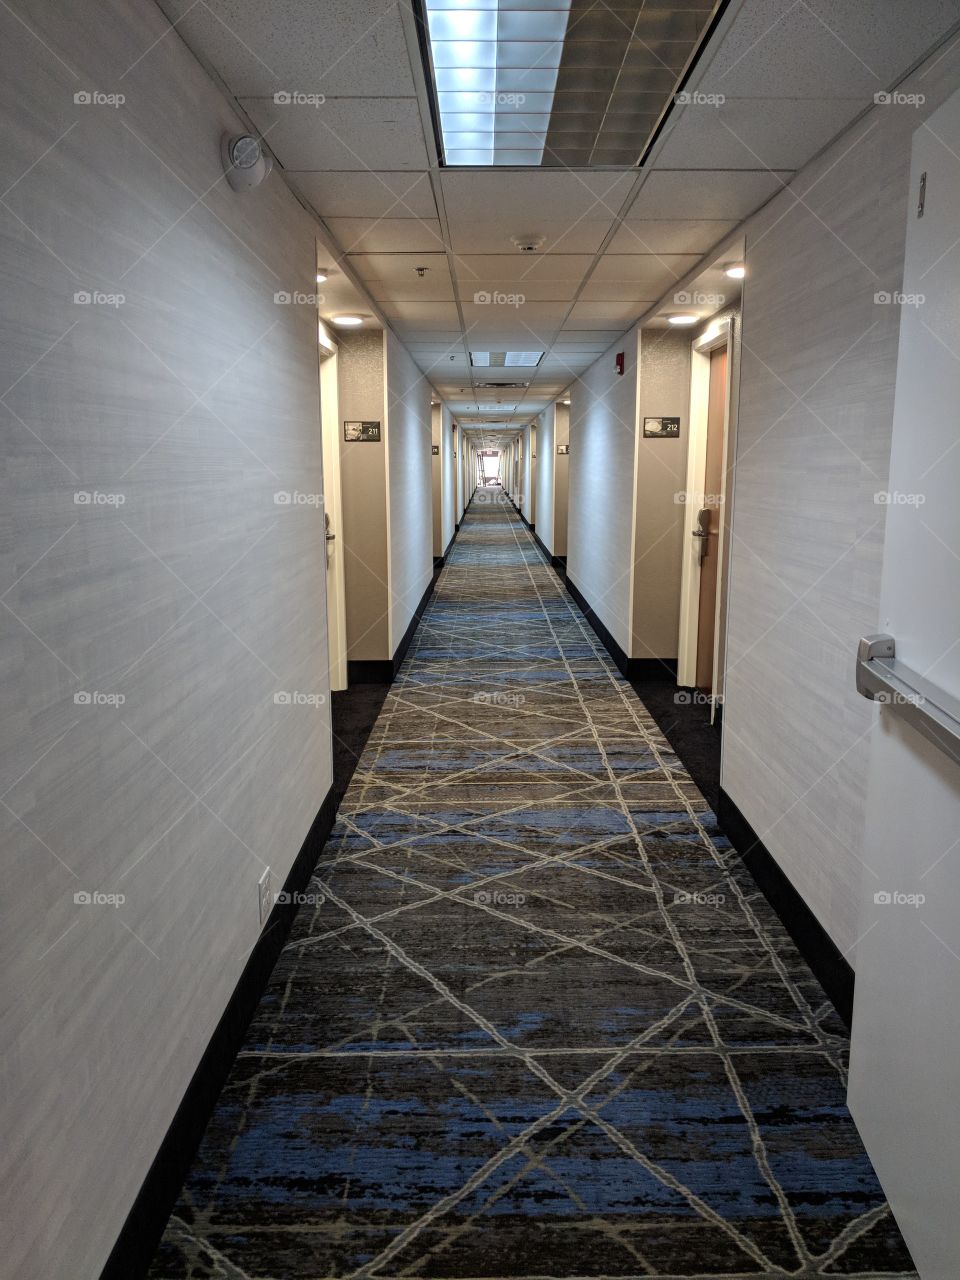 When, oh when, does this hallway end?